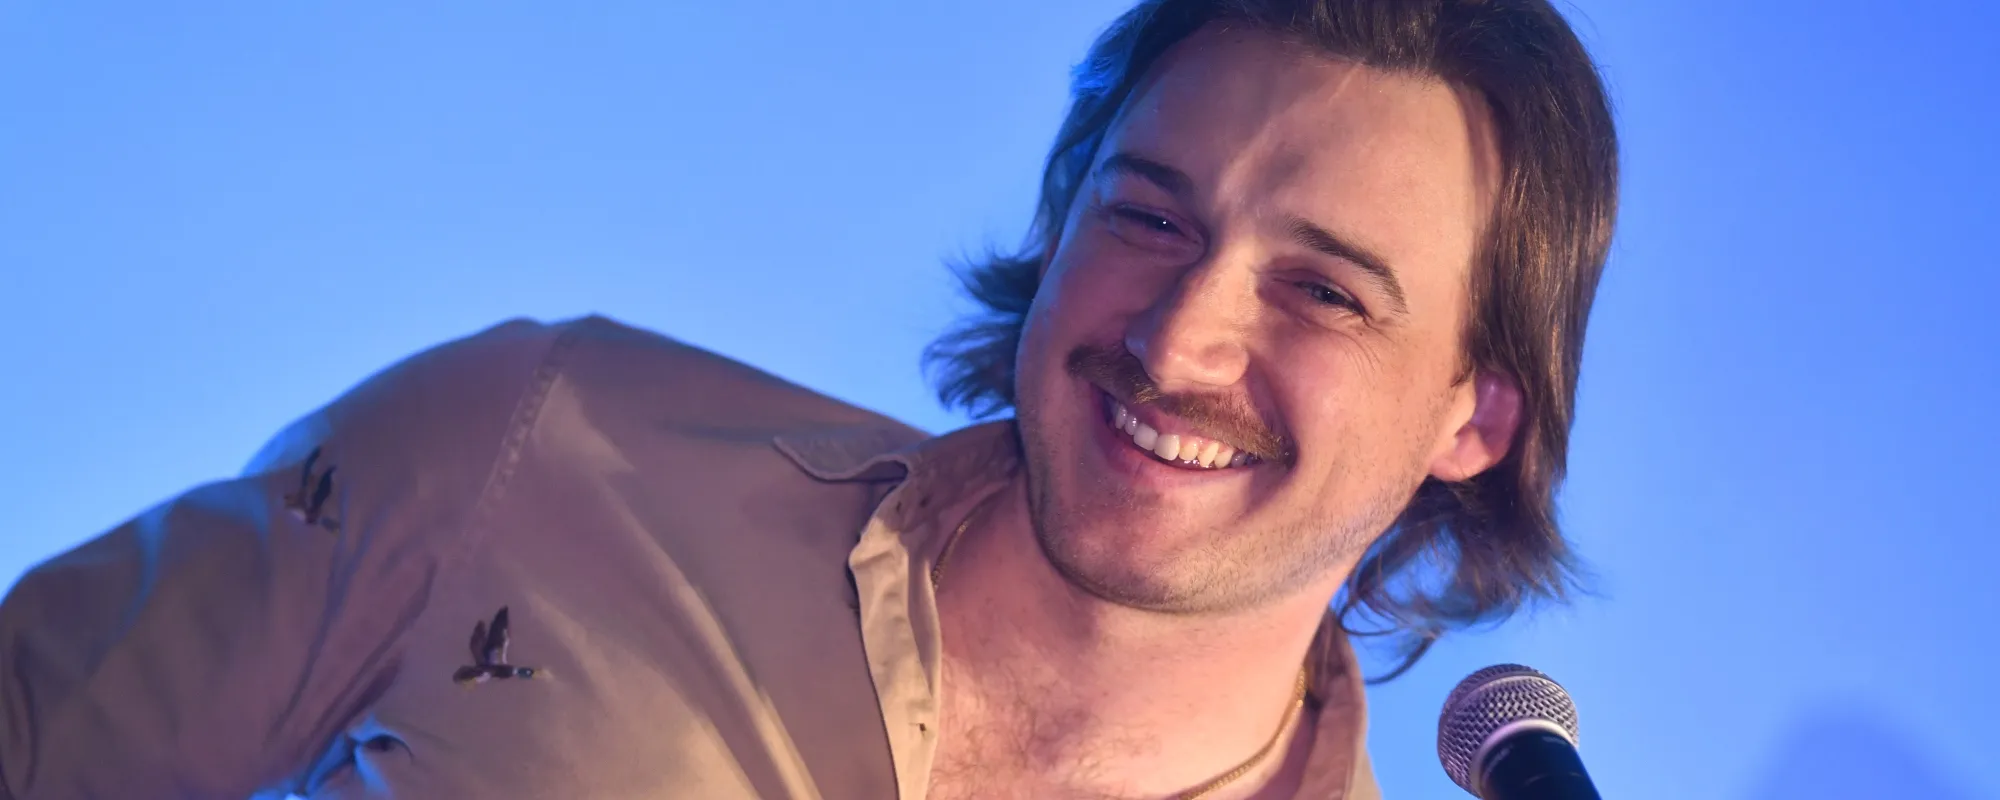 Morgan Wallen Gives Life Advice to Fan While Signing T-Shirt Poking Fun at Nashville Arrest